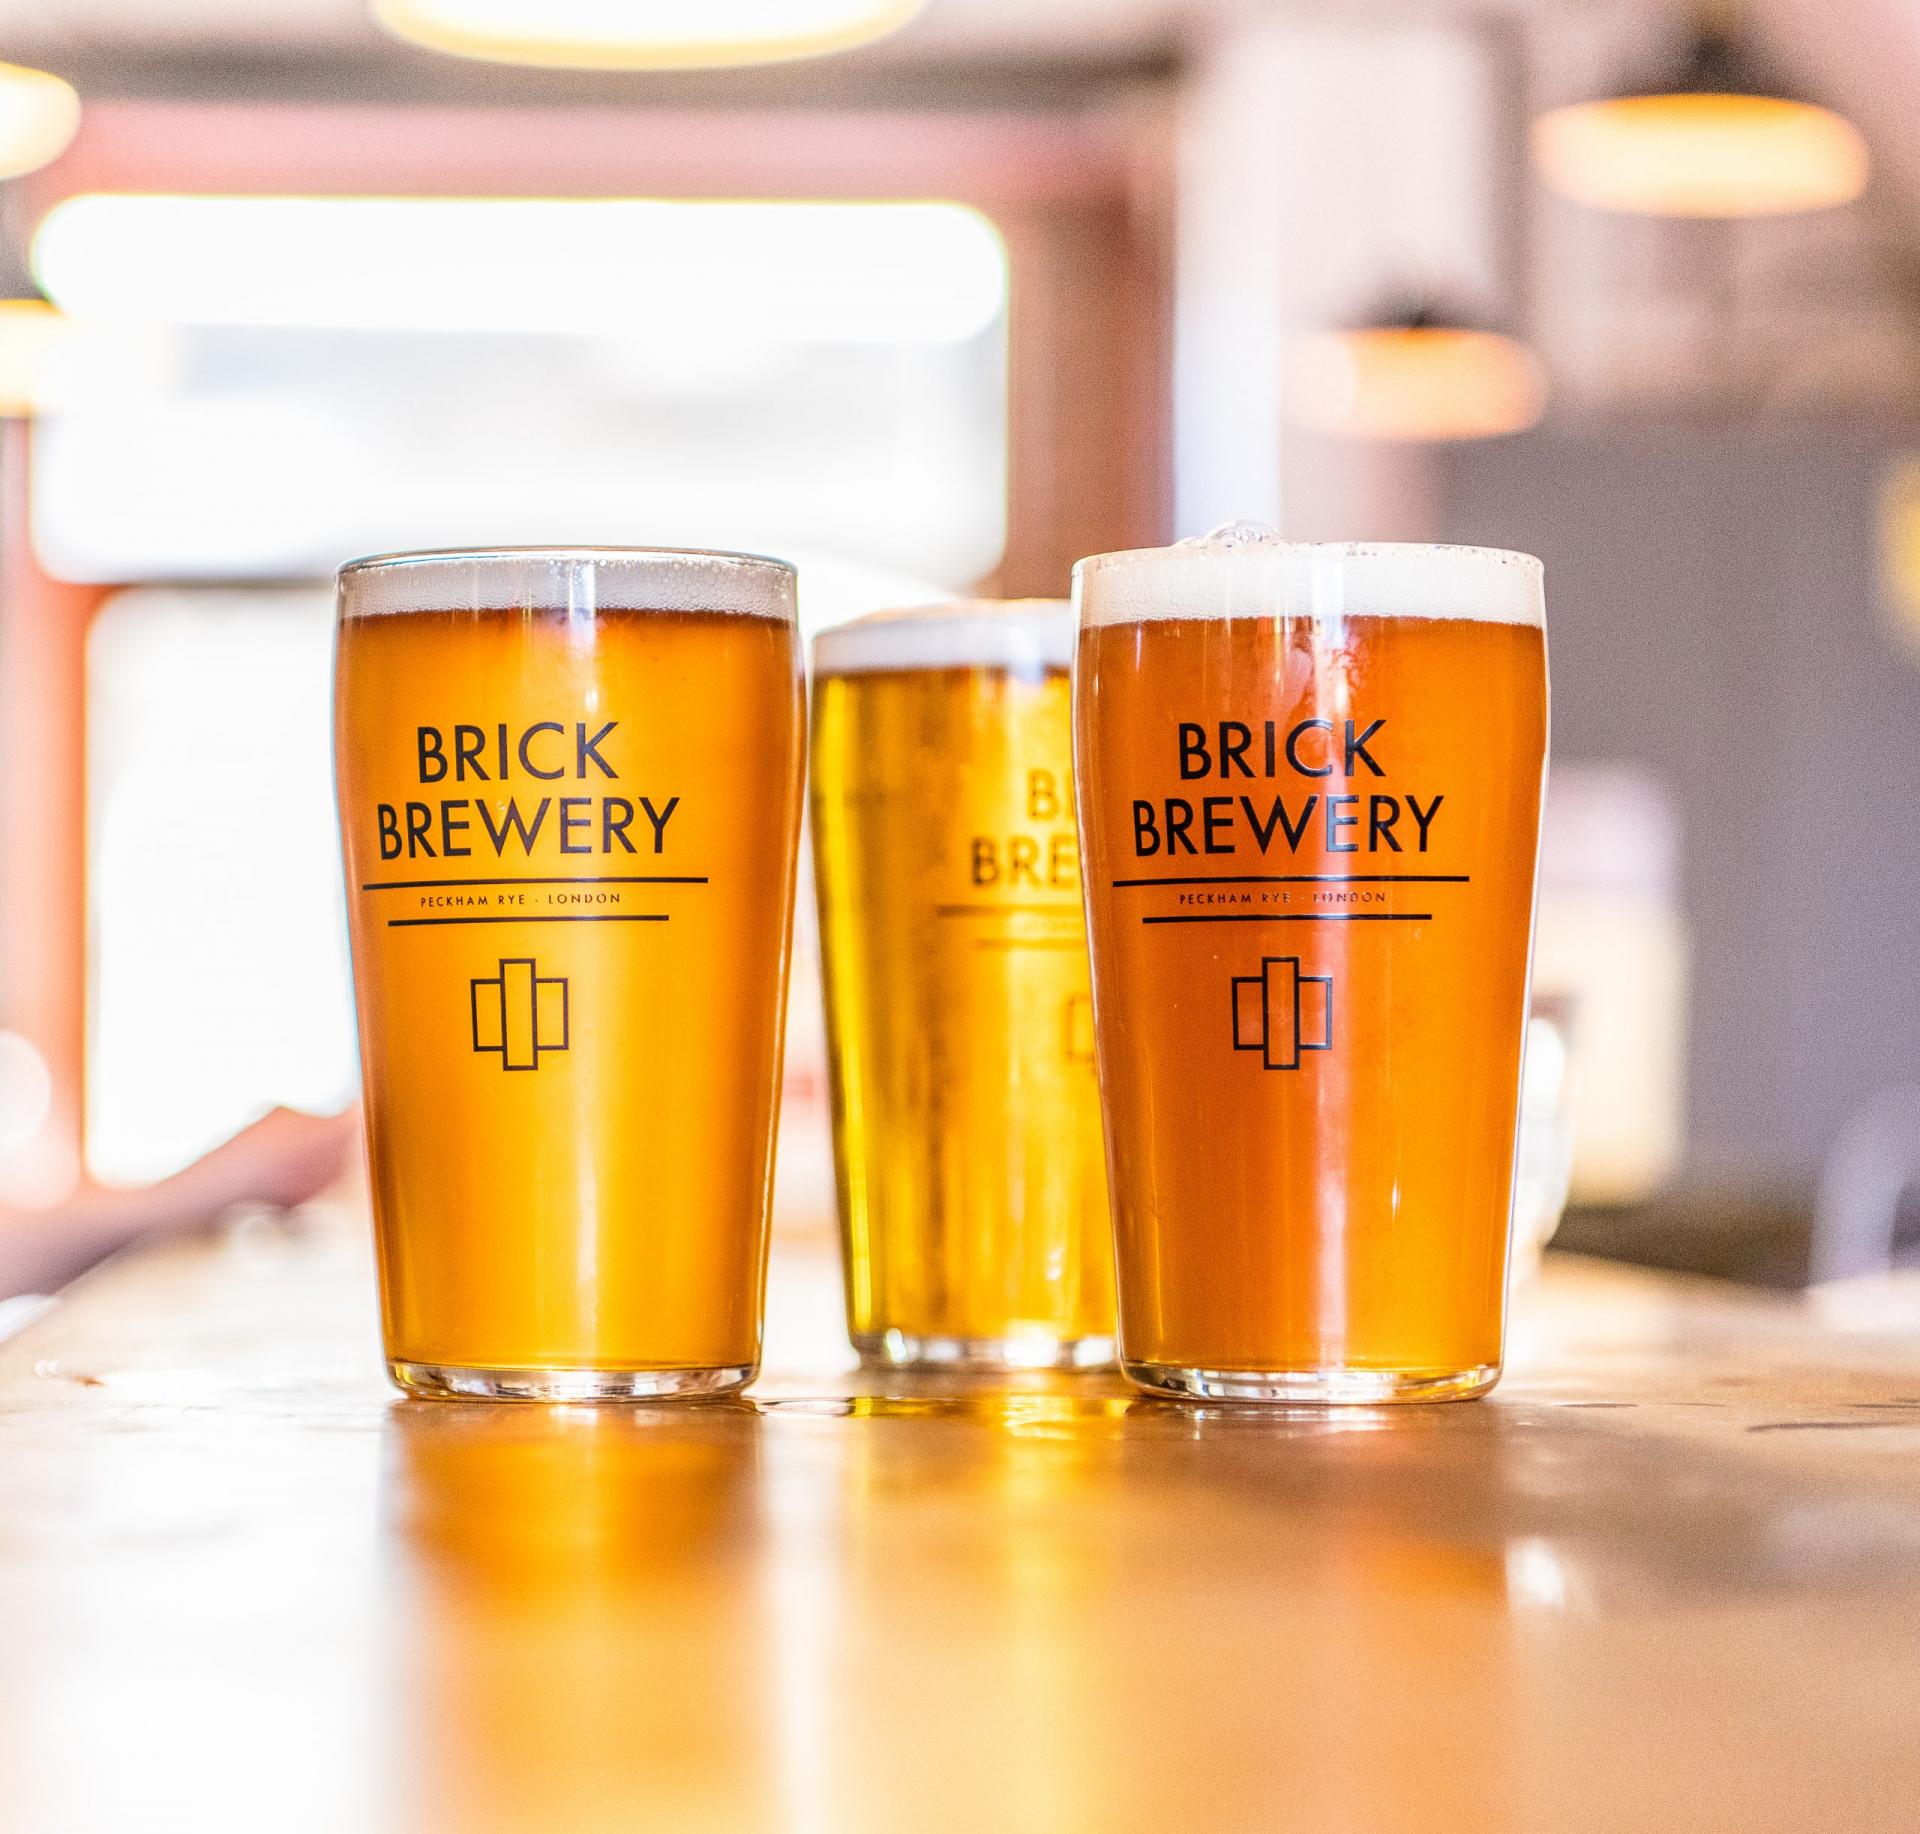 Brick Brewery acquired by The Breal Group in pre-pack deal